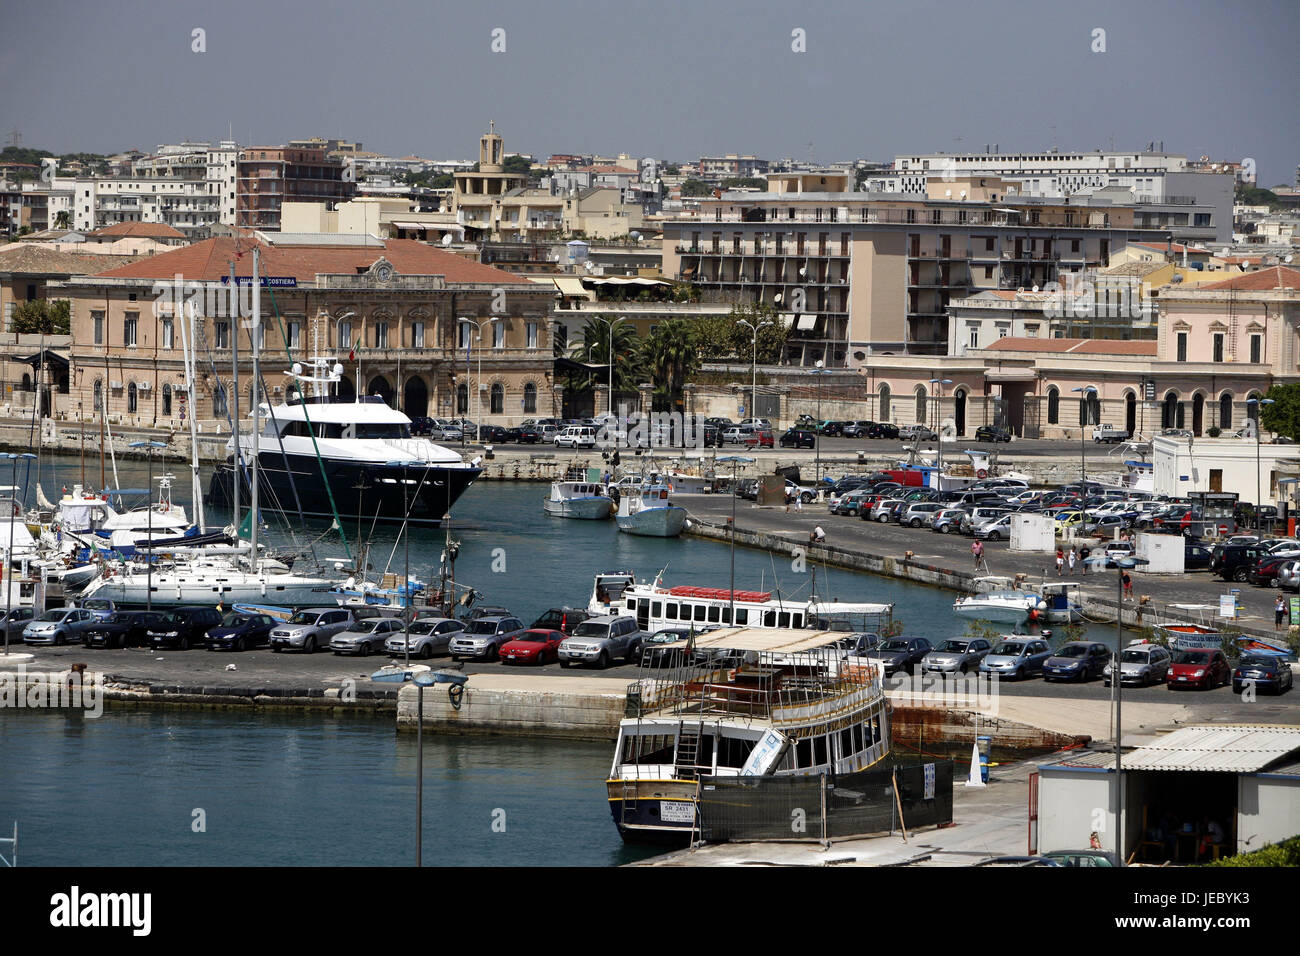 Italy, Sicily, island Ortygia, Syracuse, town view, harbour, Southern Europe, Siracusa, town, centre, houses, harbour basins, ships, boats, destination, tourism, Stock Photo